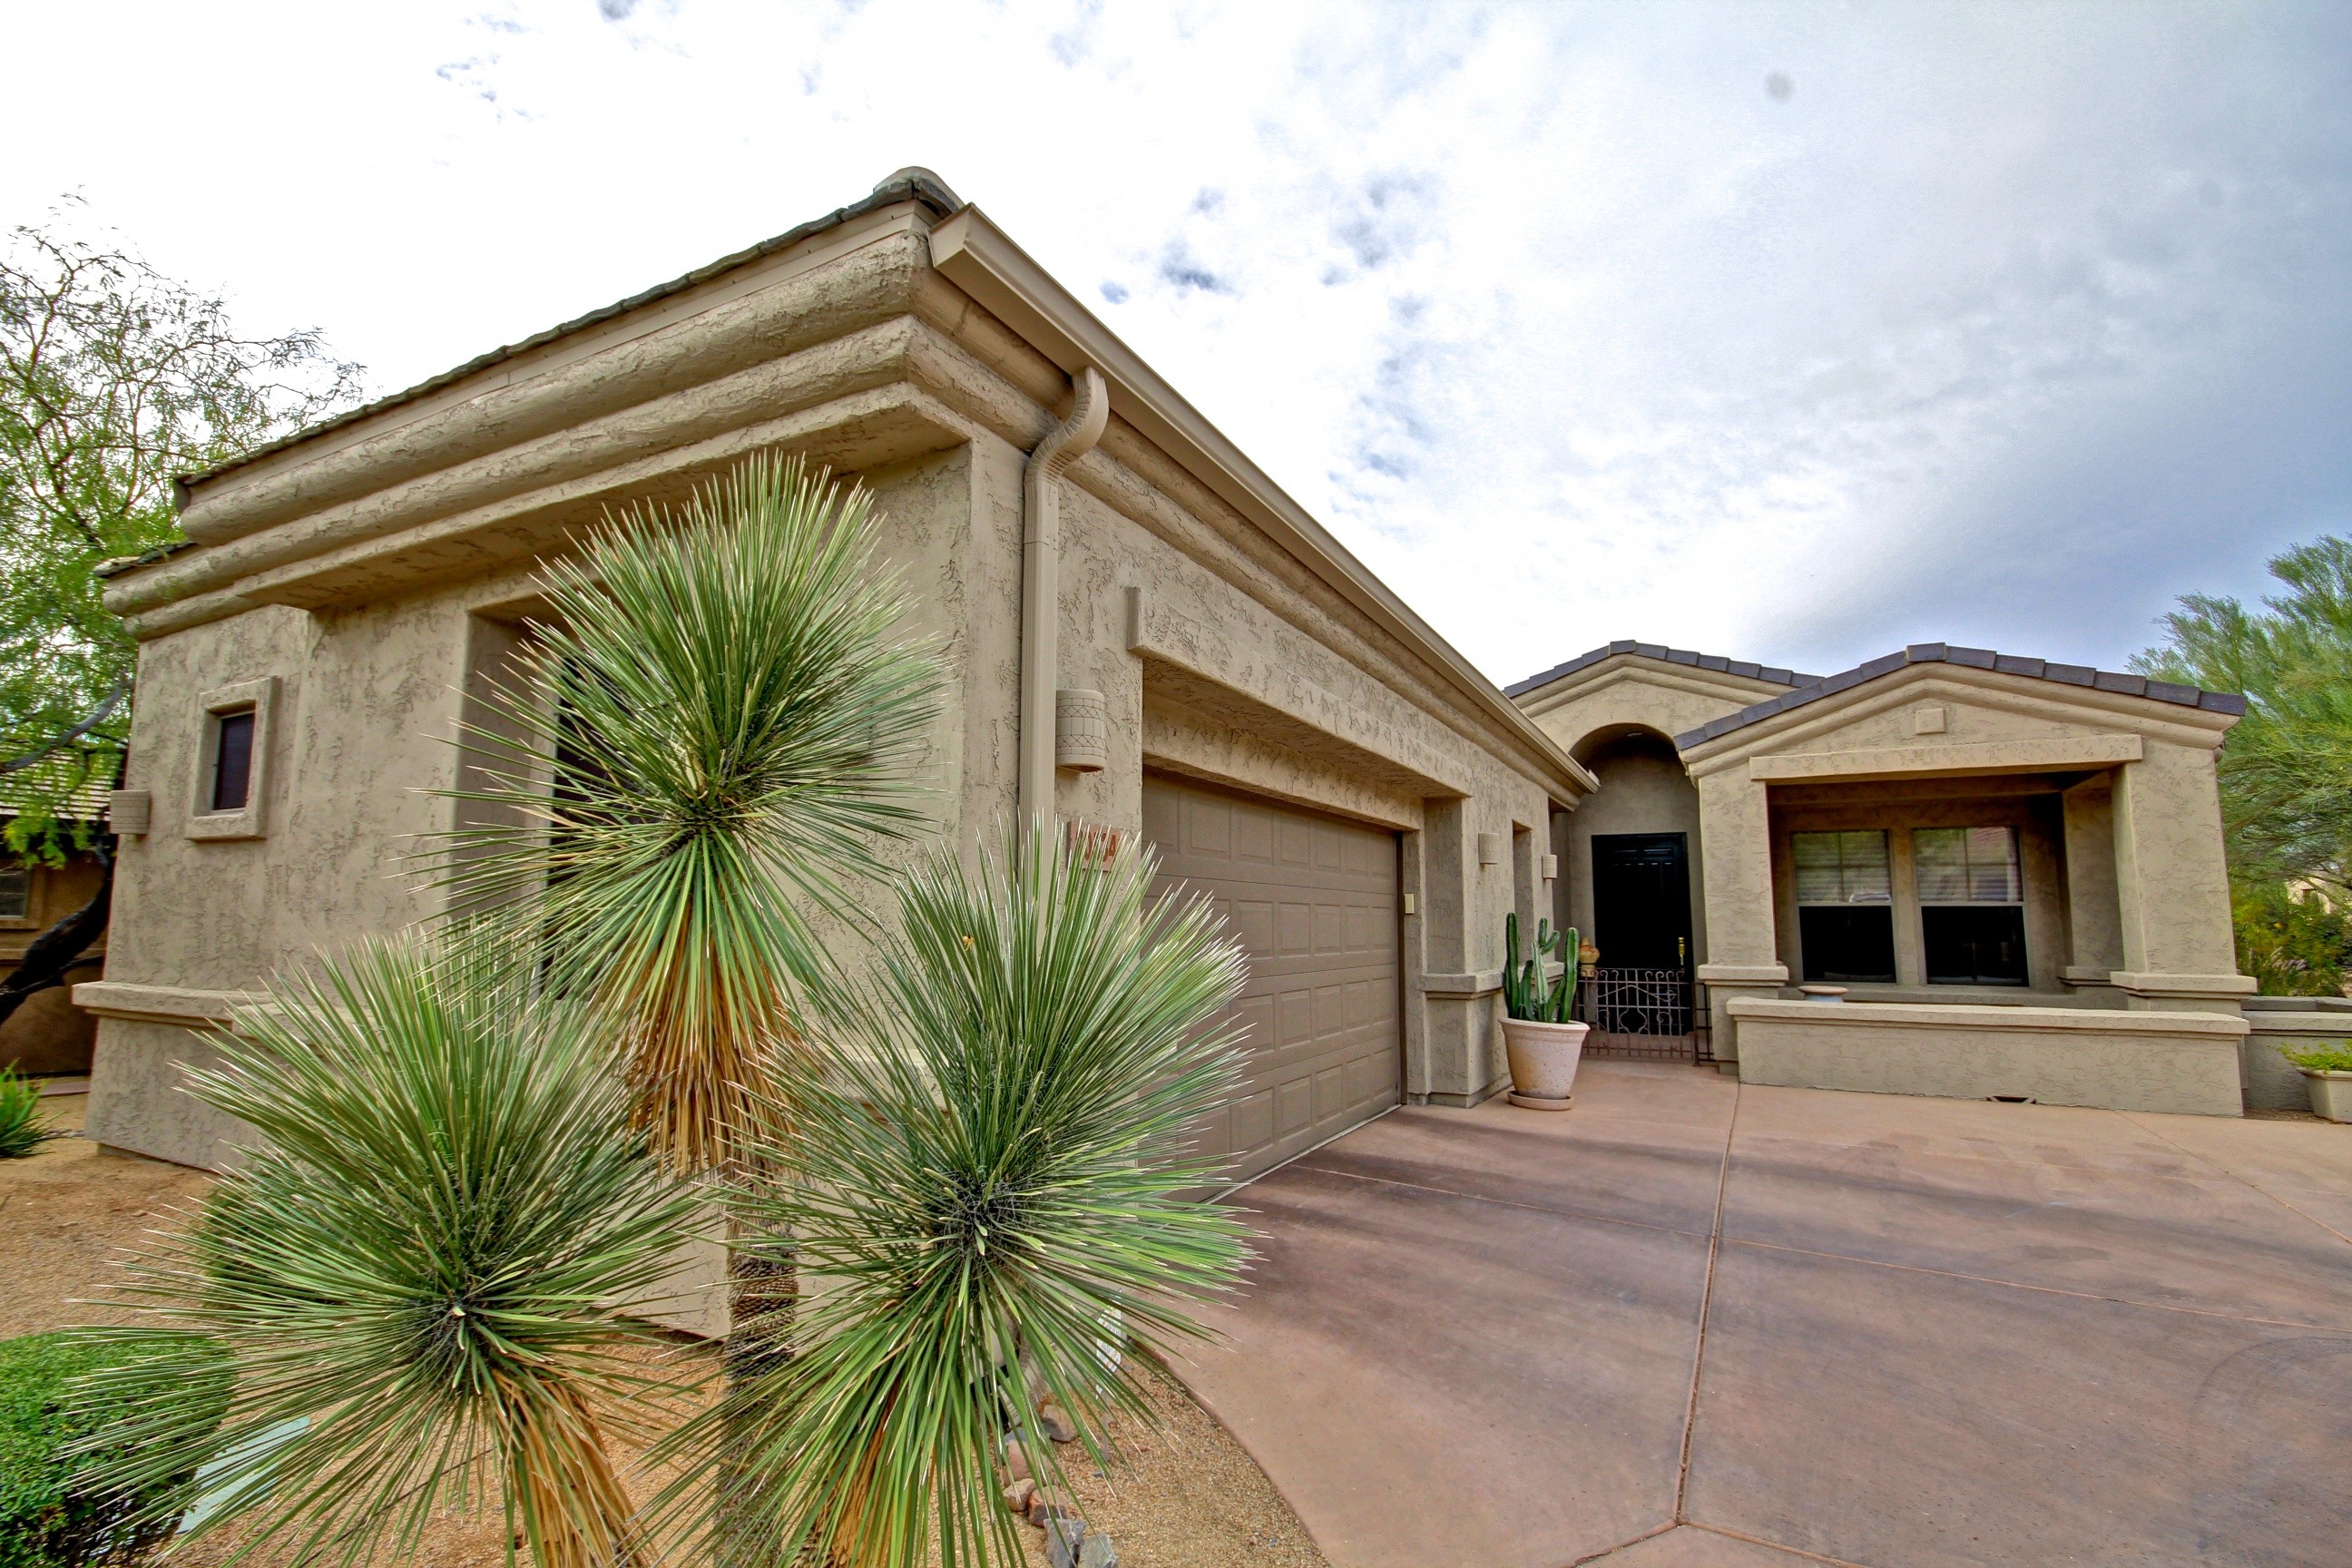 Front patio and walkway at this Scottsdale home for sale in DC Ranch located at 20534 N 95th St Scottsdale, AZ 85255 listed by Don Matheson at The Matheson Team